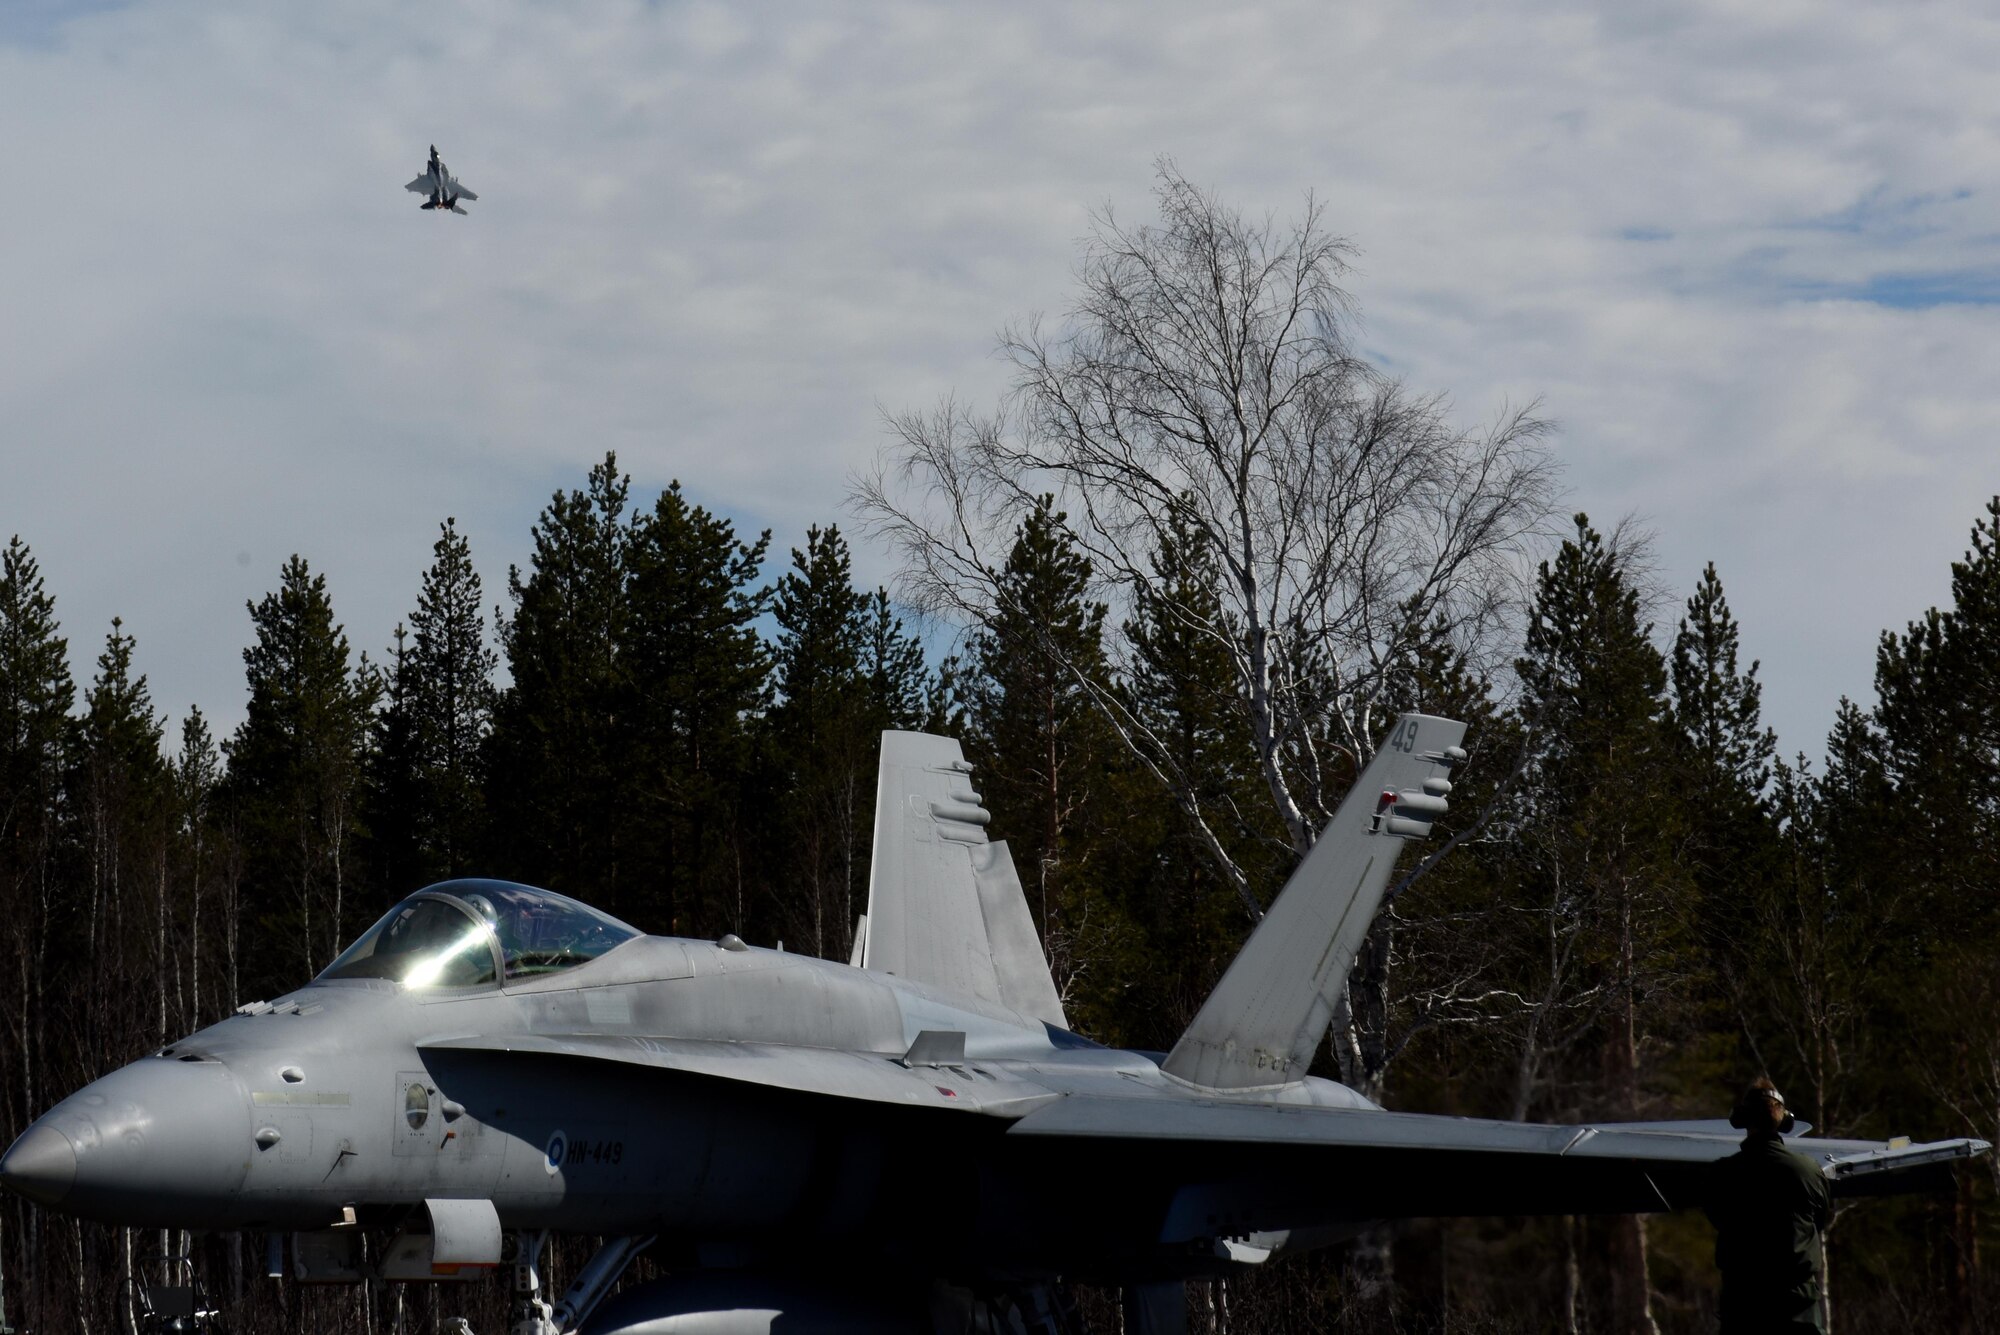 A 493rd Fighter Squadron F-15C Eagle from the 48th Fighter Wing at Royal Air Force Lakenheath, England takes off in the distance behind a Finnish F/A-18 Hornet at Rovaniemi Air Base, Finland, May 25, in support of Arctic Challenge 2017. Multinational exercises like ACE 17 are opportunities for the U.S. to strengthen relationships with European allies and partners. (U.S. Air Force photo/Airman 1st Class Abby L. Finkel)